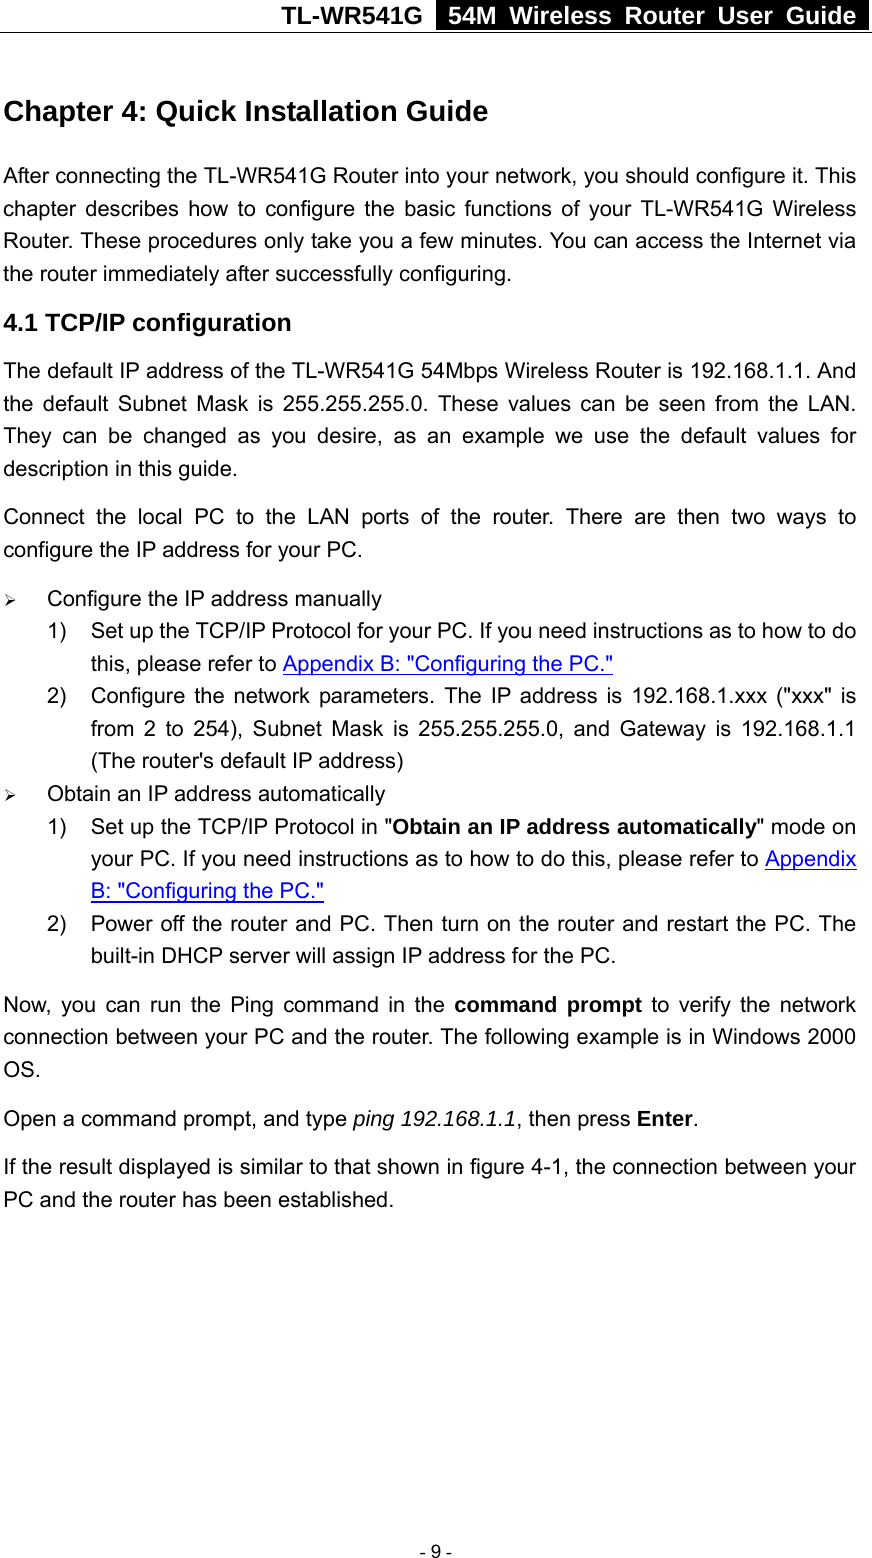 TL-WR541G   54M Wireless Router User Guide  Chapter 4: Quick Installation Guide After connecting the TL-WR541G Router into your network, you should configure it. This chapter describes how to configure the basic functions of your TL-WR541G Wireless Router. These procedures only take you a few minutes. You can access the Internet via the router immediately after successfully configuring. 4.1 TCP/IP configuration The default IP address of the TL-WR541G 54Mbps Wireless Router is 192.168.1.1. And the default Subnet Mask is 255.255.255.0. These values can be seen from the LAN. They can be changed as you desire, as an example we use the default values for description in this guide. Connect the local PC to the LAN ports of the router. There are then two ways to configure the IP address for your PC. ¾ Configure the IP address manually 1)  Set up the TCP/IP Protocol for your PC. If you need instructions as to how to do this, please refer to Appendix B: &quot;Configuring the PC.&quot; 2)  Configure the network parameters. The IP address is 192.168.1.xxx (&quot;xxx&quot; is from 2 to 254), Subnet Mask is 255.255.255.0, and Gateway is 192.168.1.1 (The router&apos;s default IP address) ¾ Obtain an IP address automatically 1)  Set up the TCP/IP Protocol in &quot;Obtain an IP address automatically&quot; mode on your PC. If you need instructions as to how to do this, please refer to Appendix B: &quot;Configuring the PC.&quot; 2)  Power off the router and PC. Then turn on the router and restart the PC. The built-in DHCP server will assign IP address for the PC. Now, you can run the Ping command in the command prompt to verify the network connection between your PC and the router. The following example is in Windows 2000 OS. Open a command prompt, and type ping 192.168.1.1, then press Enter. If the result displayed is similar to that shown in figure 4-1, the connection between your PC and the router has been established.    - 9 - 